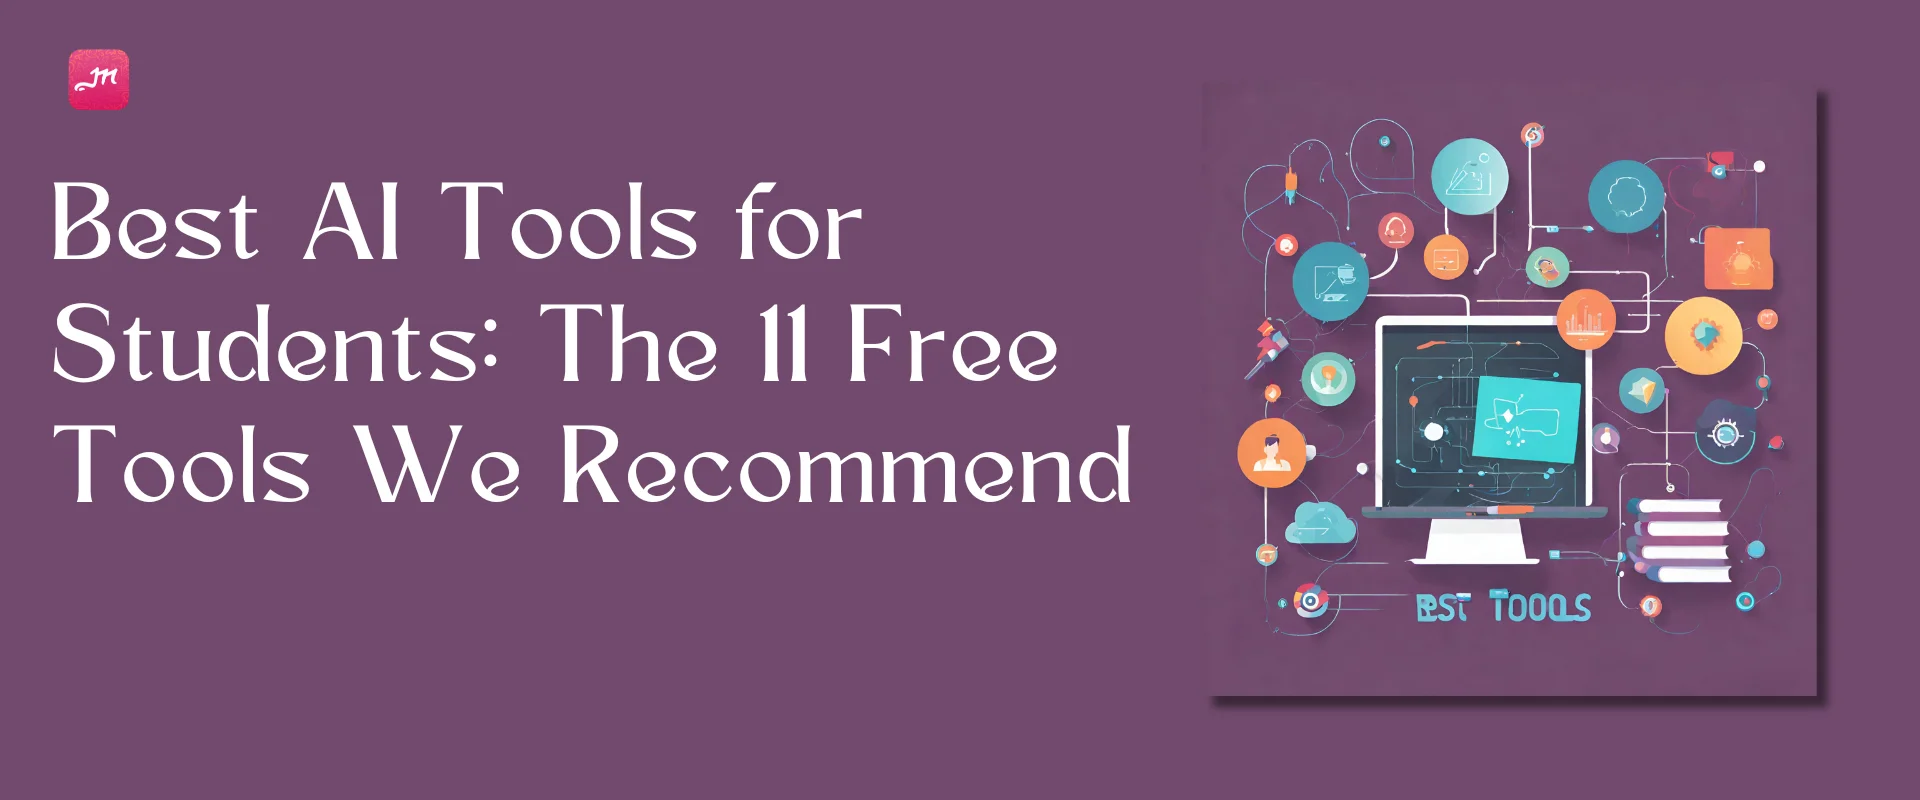 Best AI Tools for Students: The 11 Free Tools We Recommend